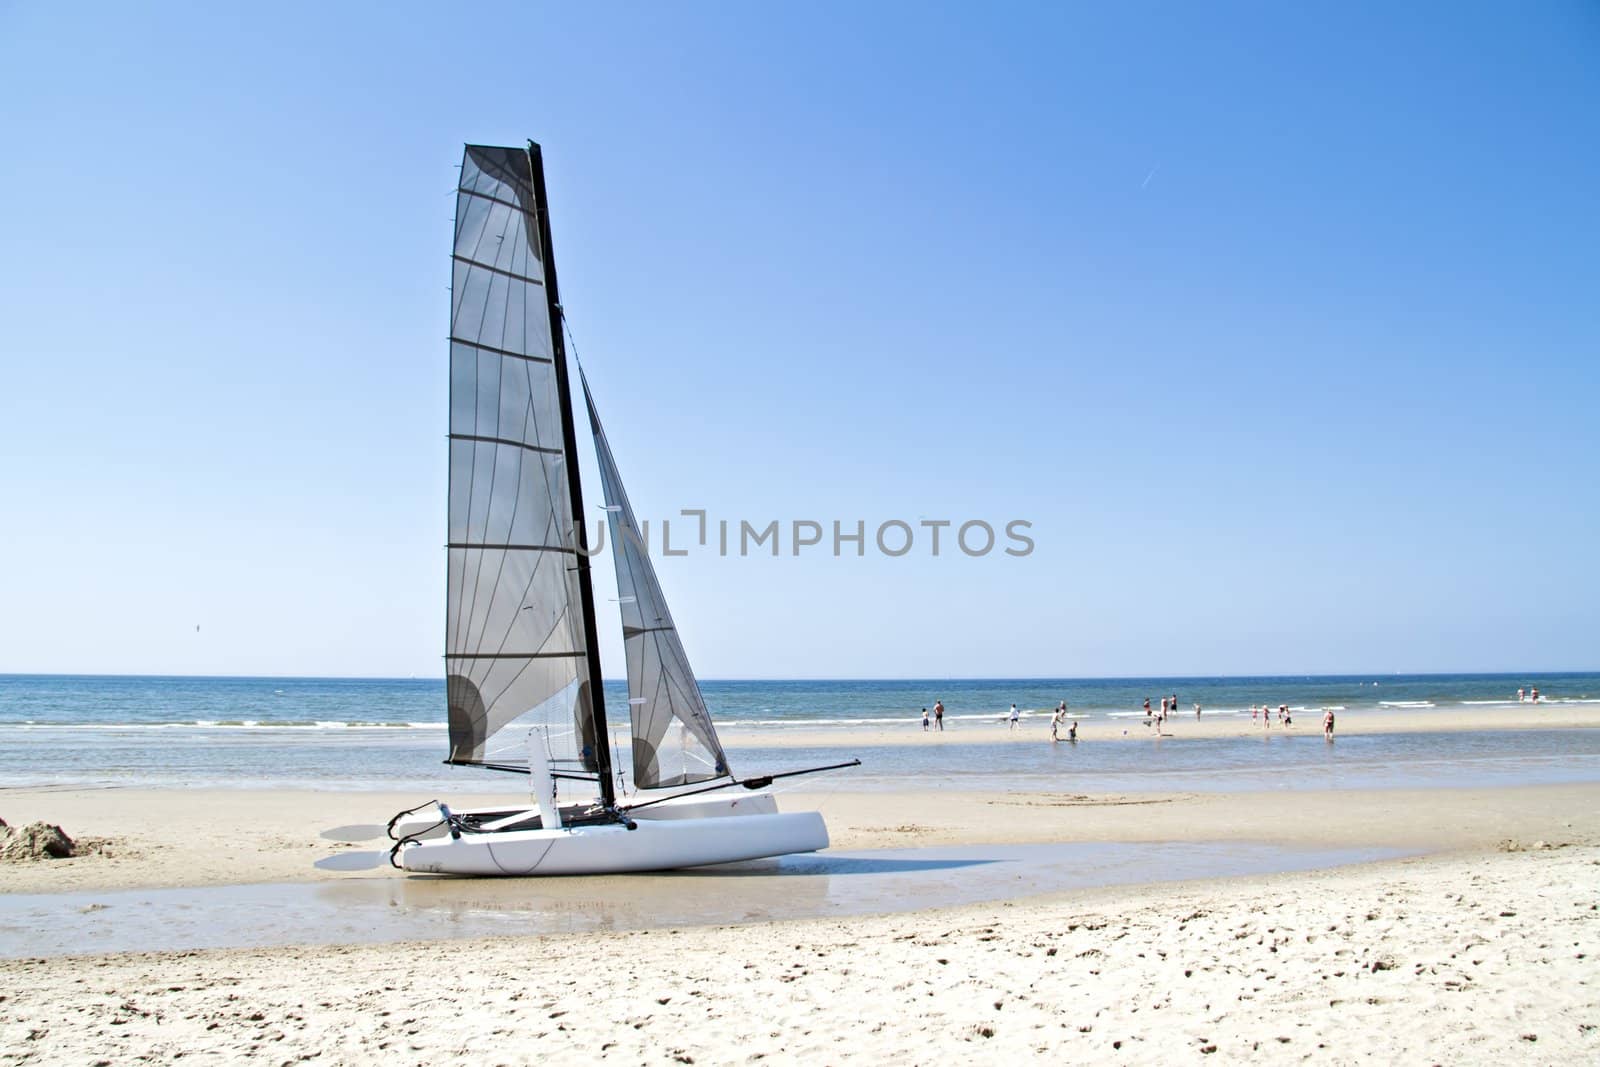 Catamaran at the beach from the north sea in the Netherlands